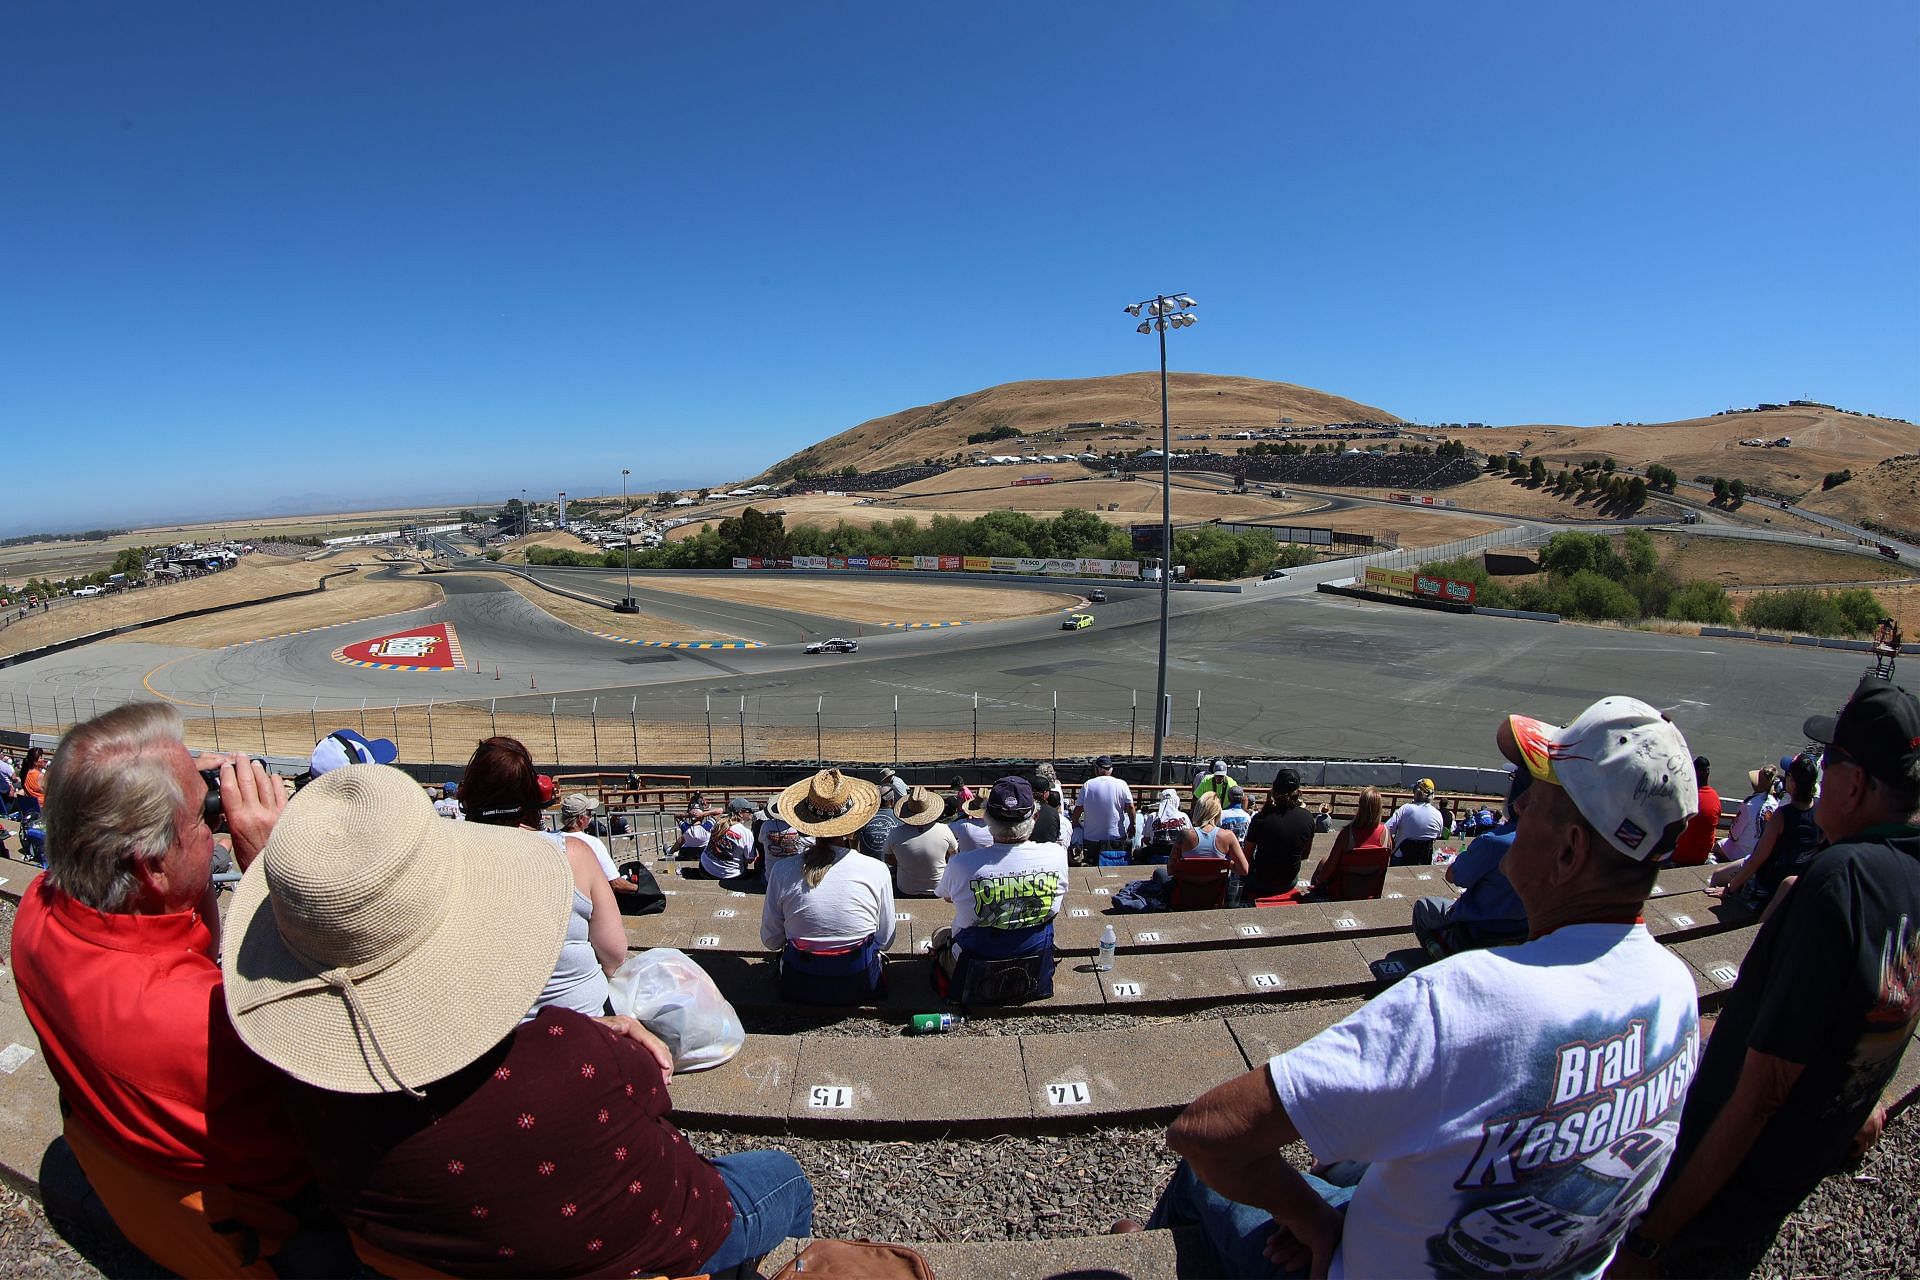 Fans look on during the NASCAR Cup Series Toyota/Save Mart 350 at Sonoma Raceway (Photo by Carmen Mandato/Getty Images)